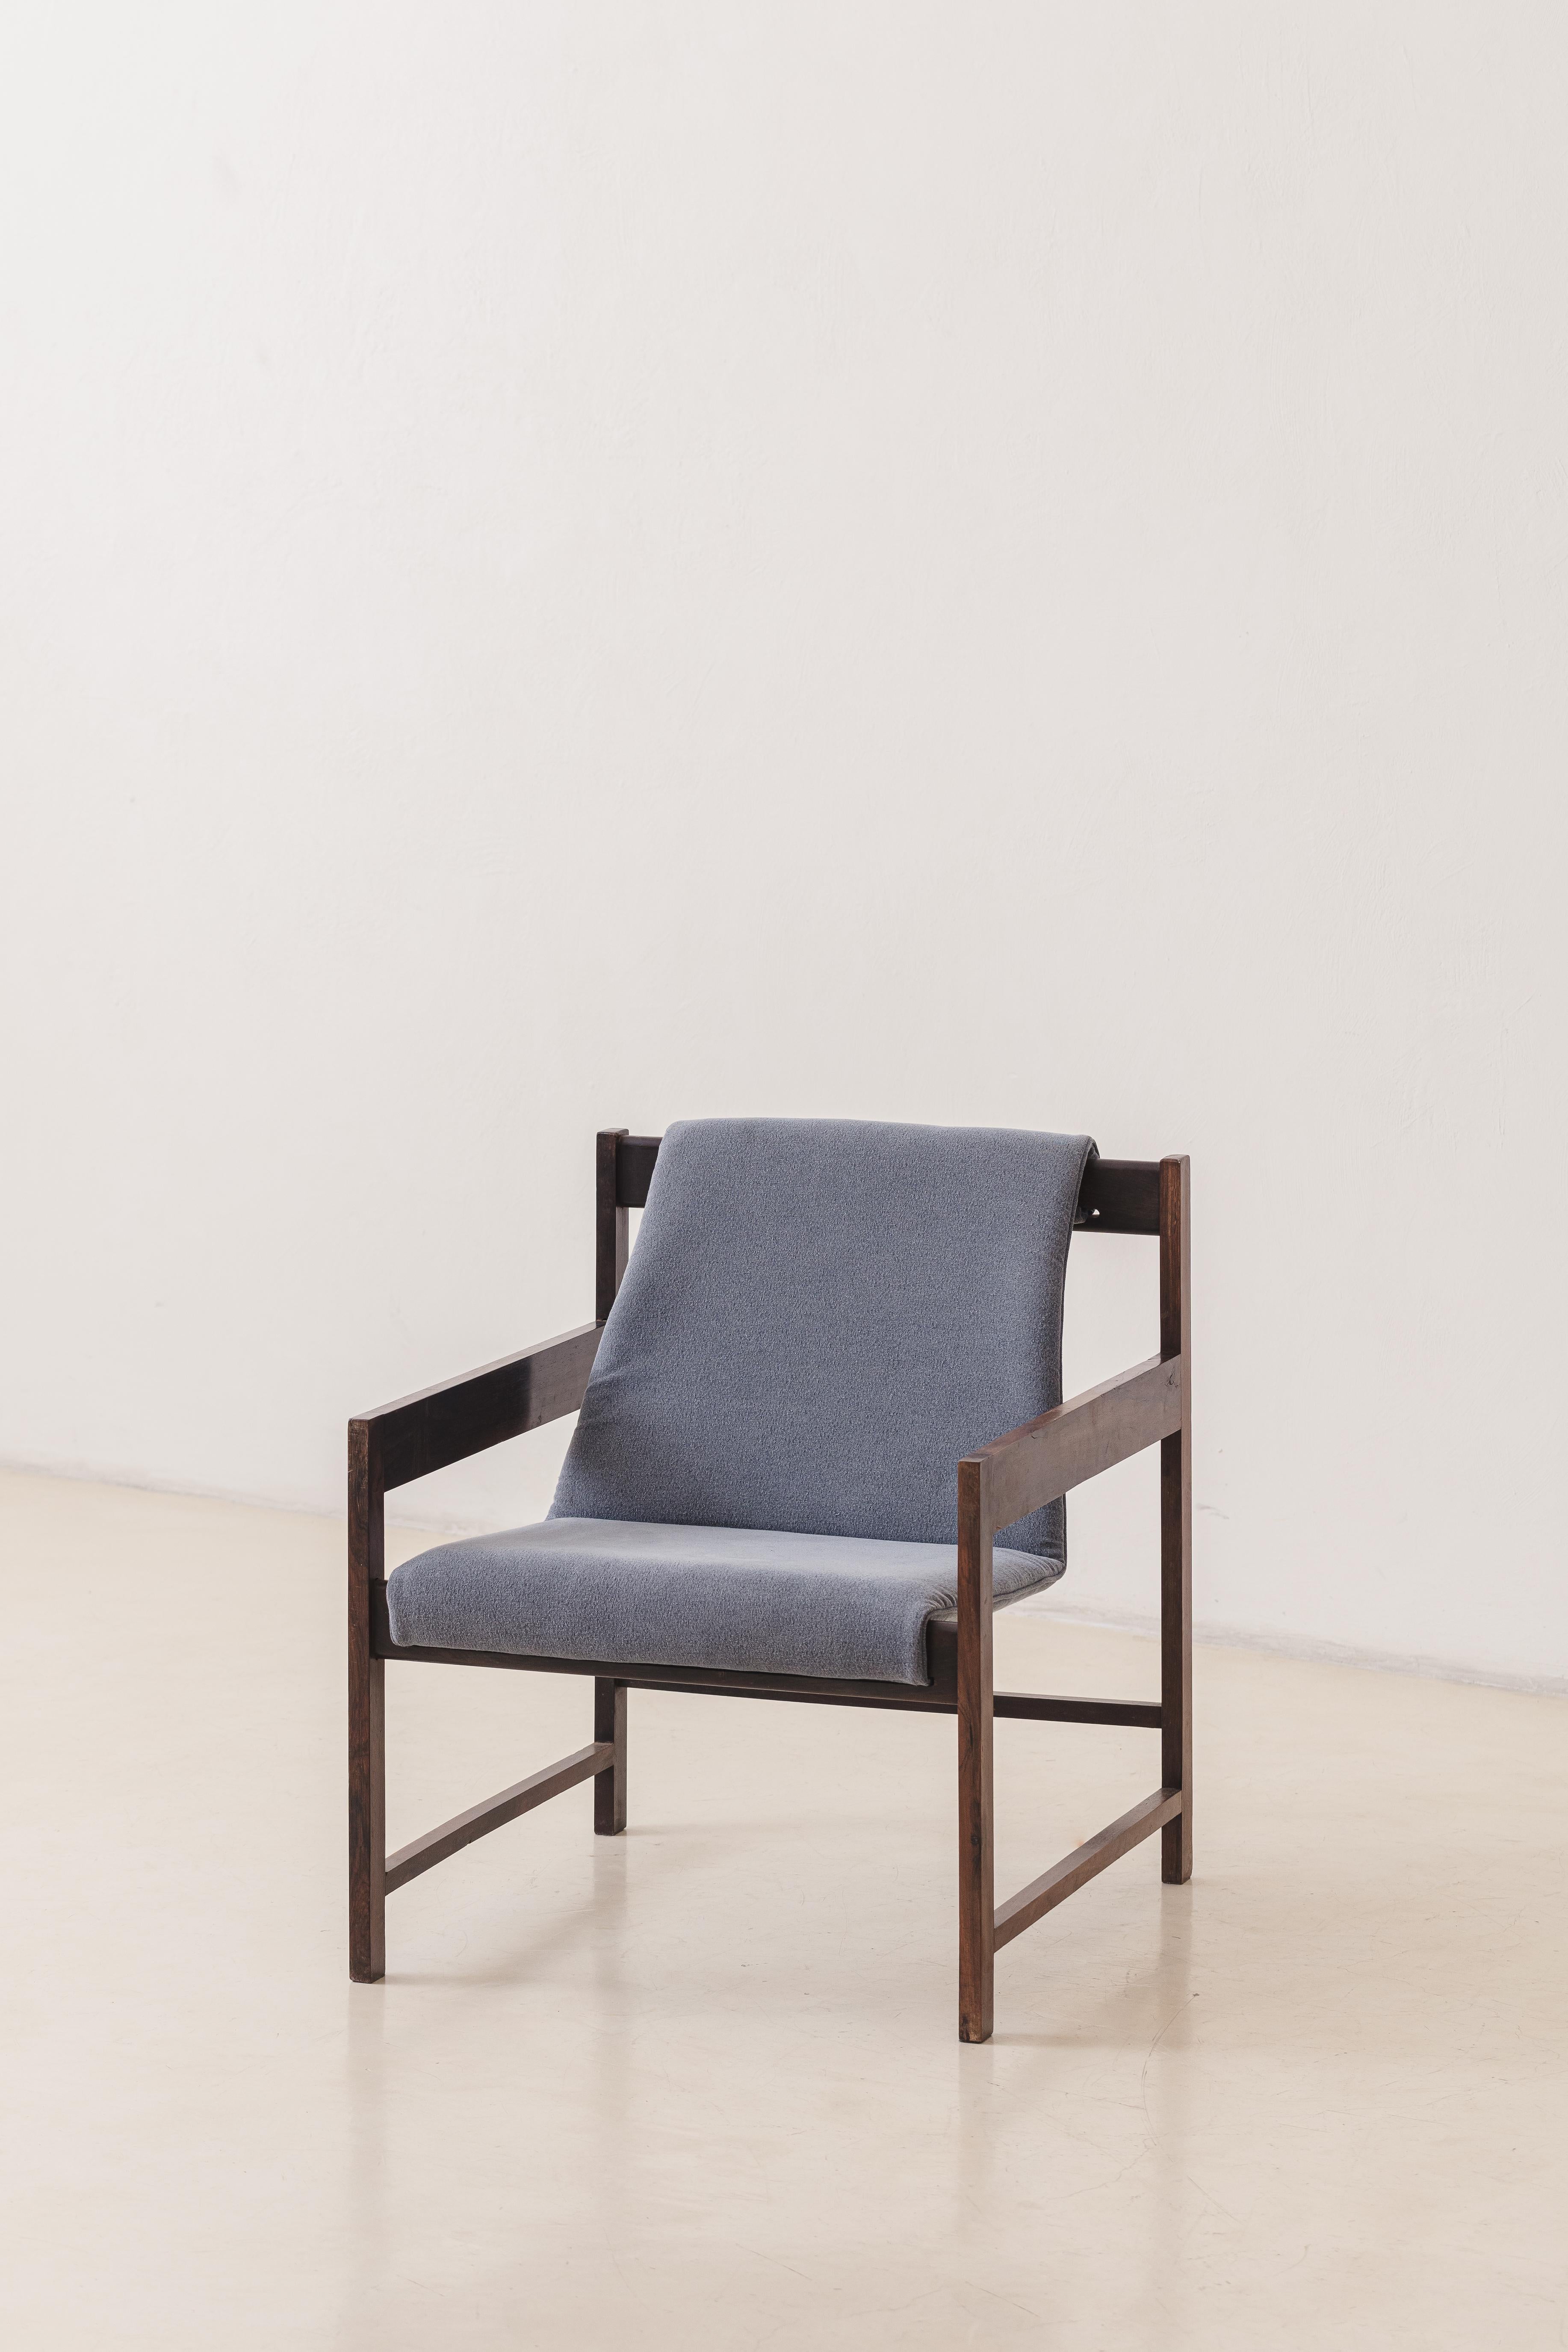 Brazilian Lia Armchair Design by Sergio Rodrigues, Rosewood, Mid-Century Modern, Oca 1960s For Sale